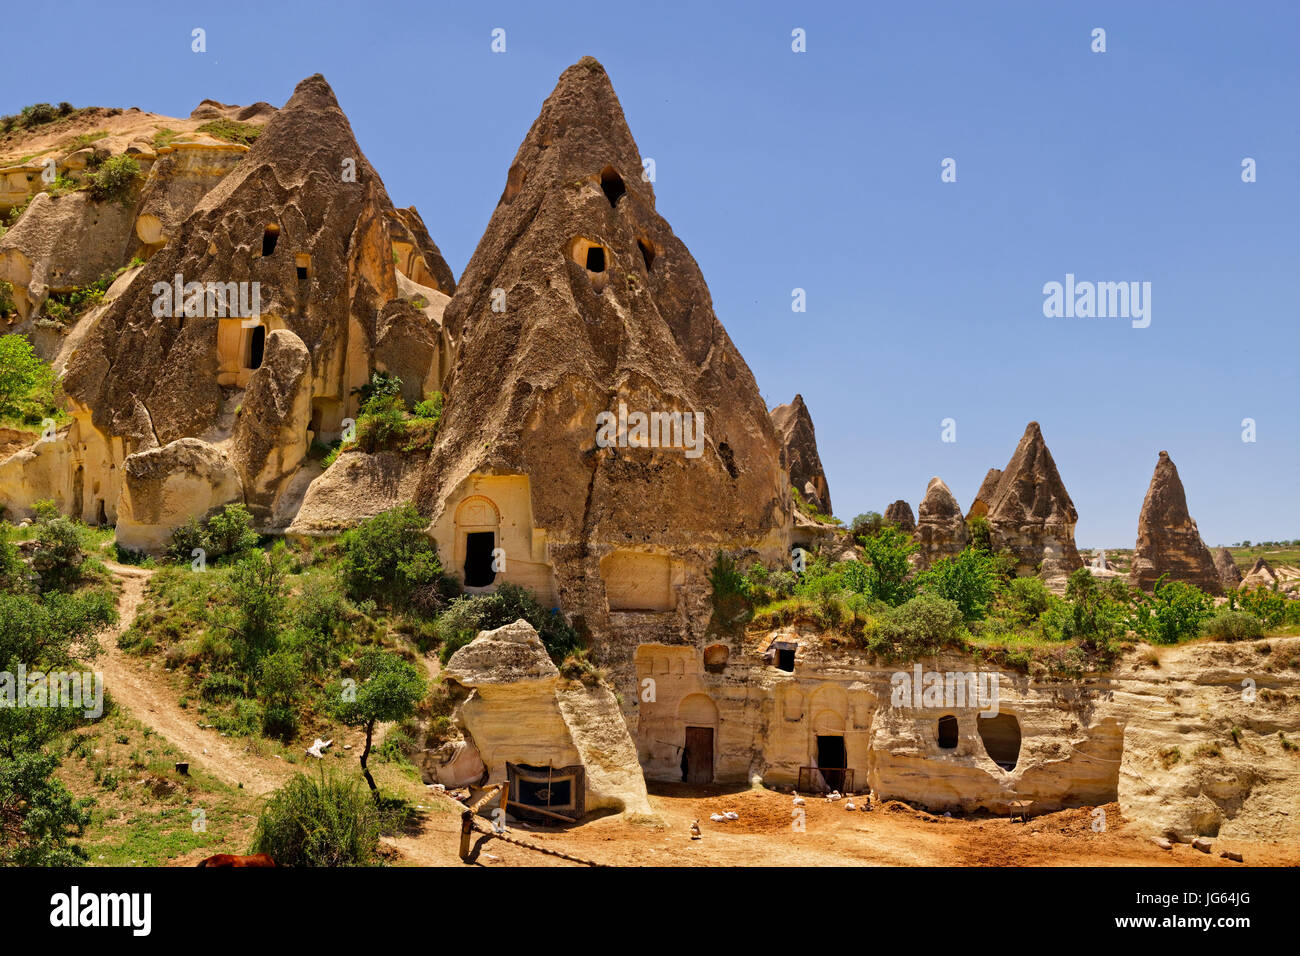 Occupied cave dwellings at Goreme National Park, Cappadocia, Turkey. Stock Photo